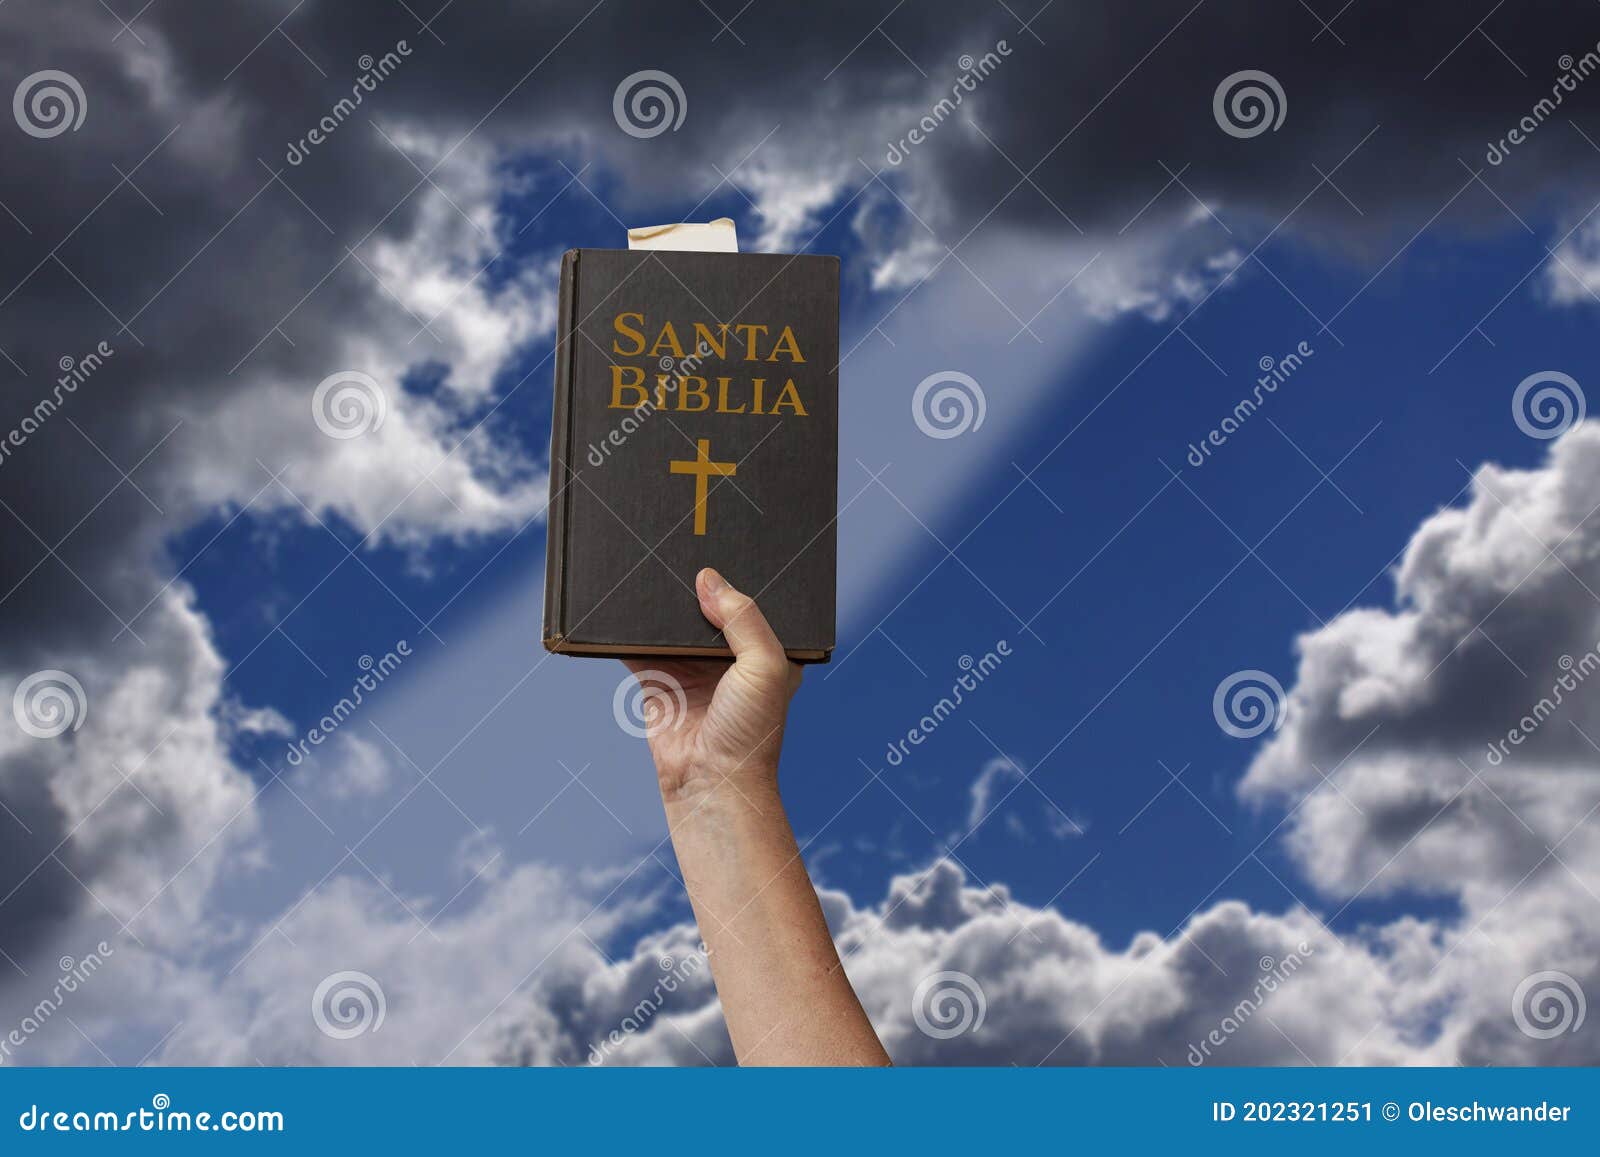 arm raised into the air a hand reaching up and holding the holy bible in spanish santa biblia. ray of light coming through dramati